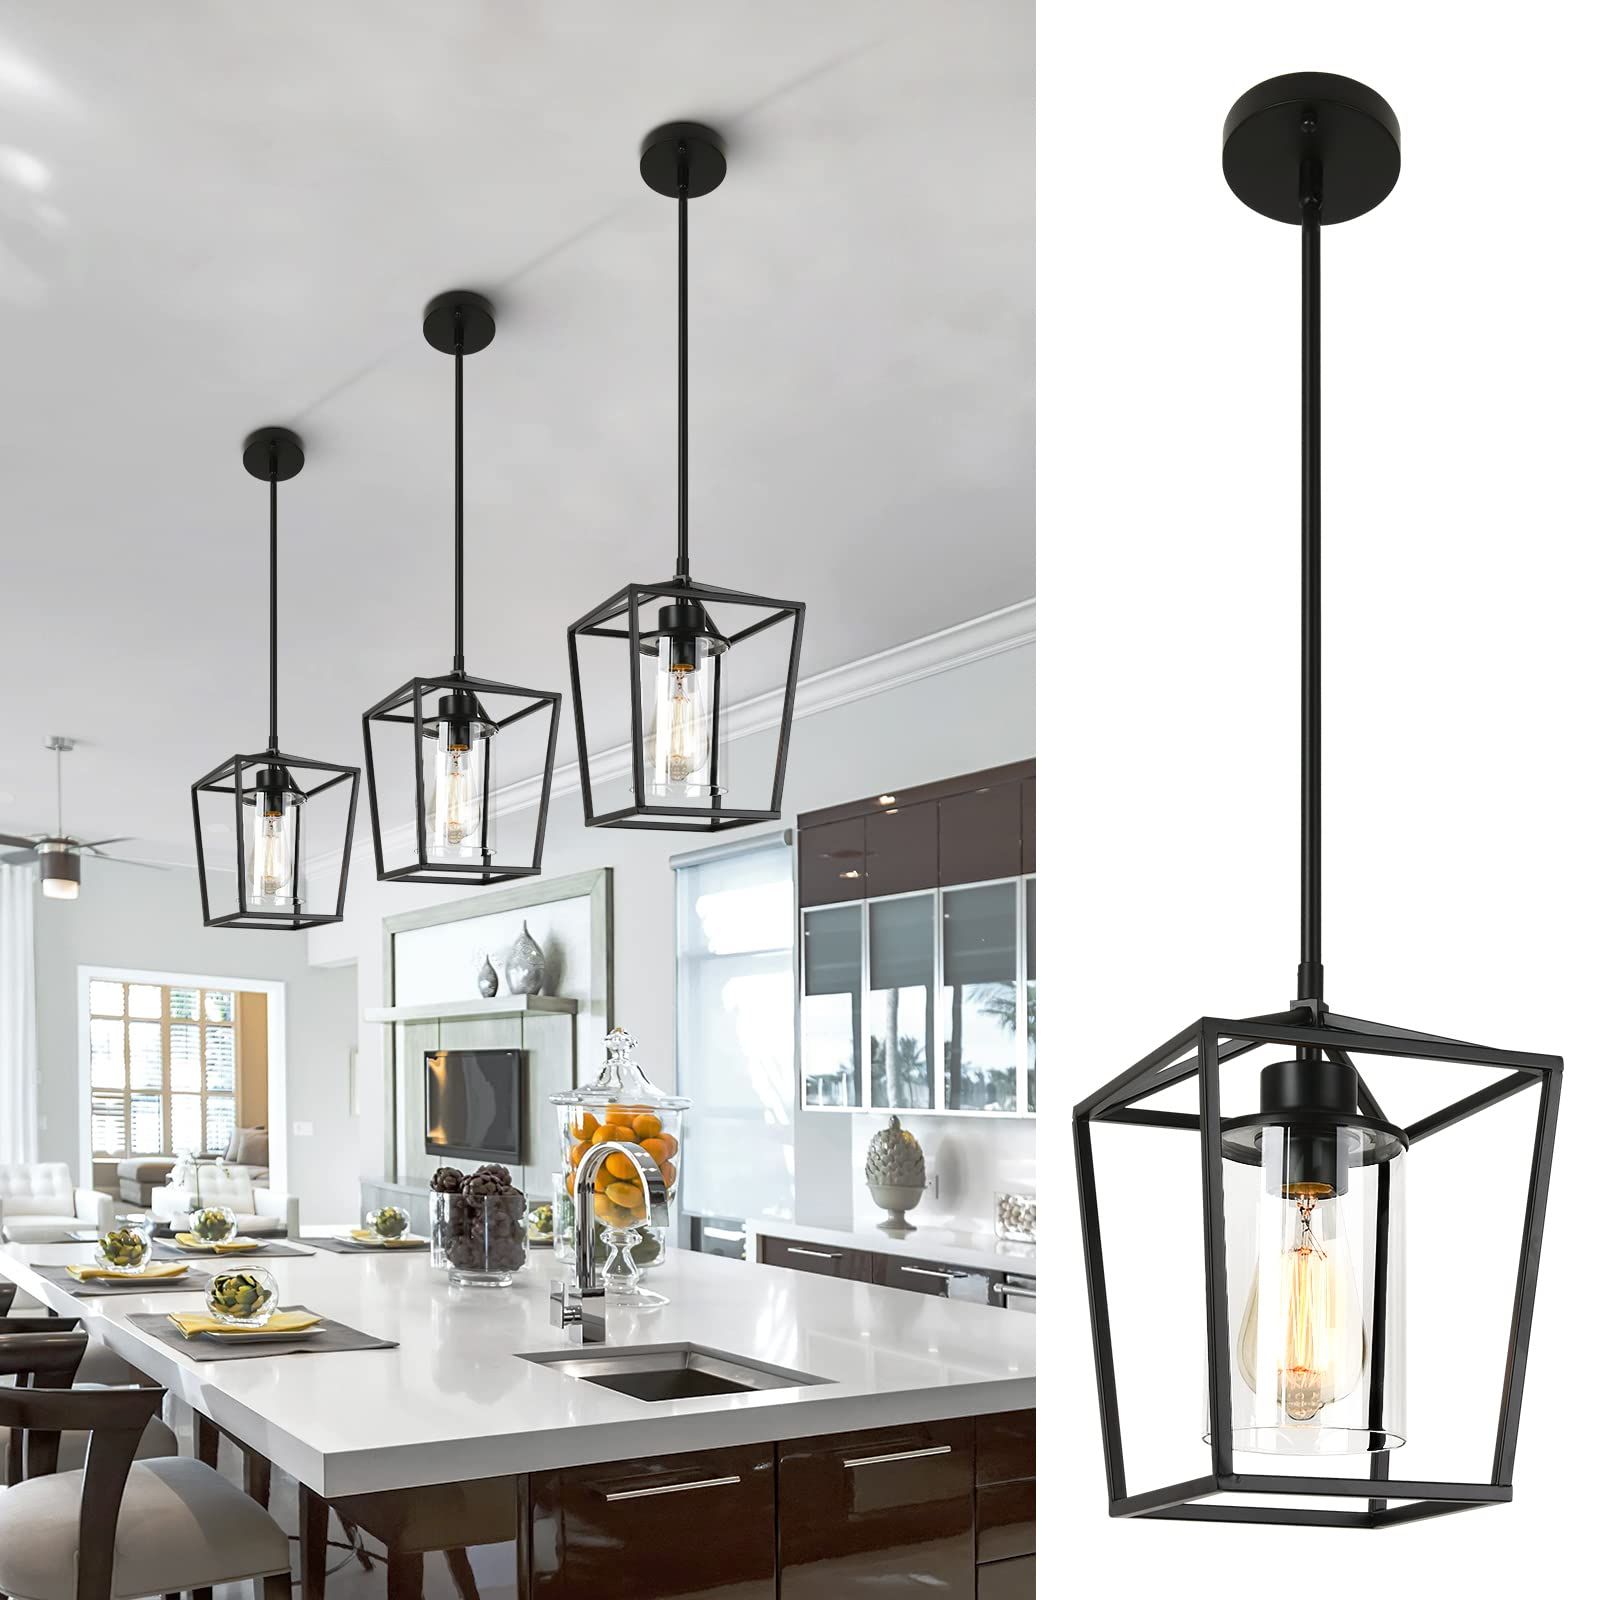 One Light Lantern Chandeliers With Most Popular 1 Light Black Pendant Light Fixture Farmhouse Iron Cage Metal Pendant Light  Lantern Hanging Light Fixtures With Clear Glass Shade For Kitchen Island,  Entryway, Dining Room, Hallway – – Amazon (View 11 of 15)